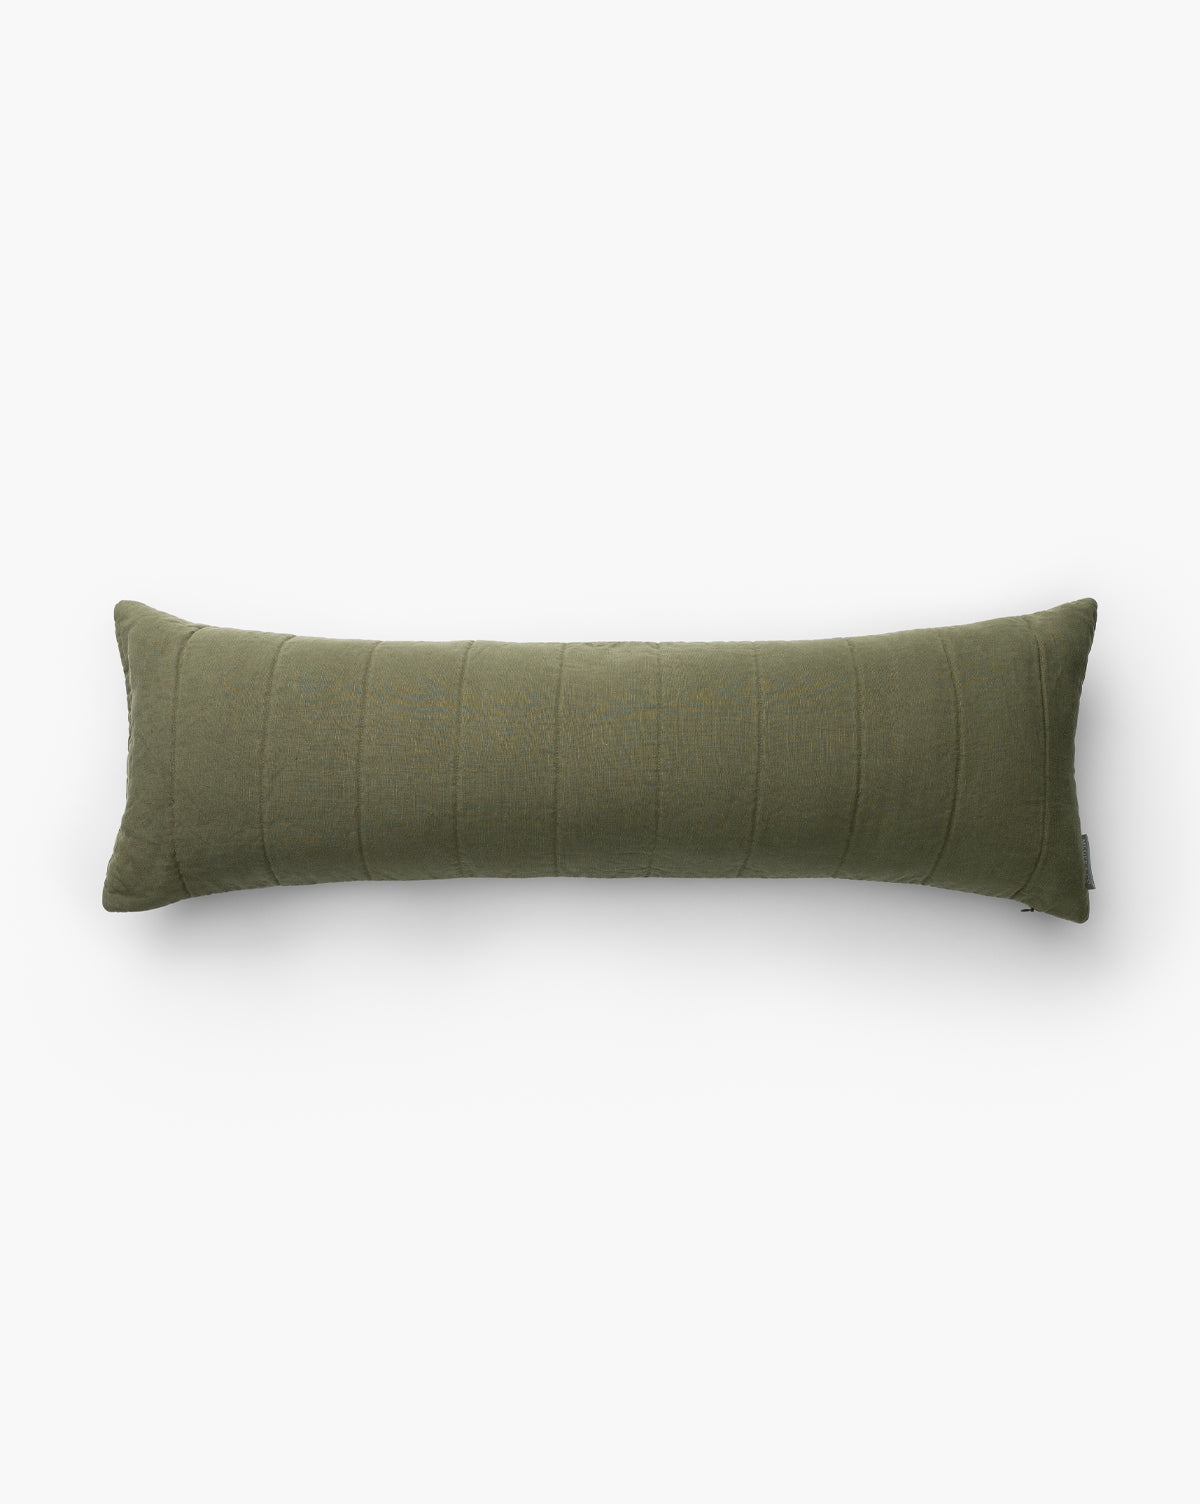 Aan Clothing, Noah Channel Pillow Cover